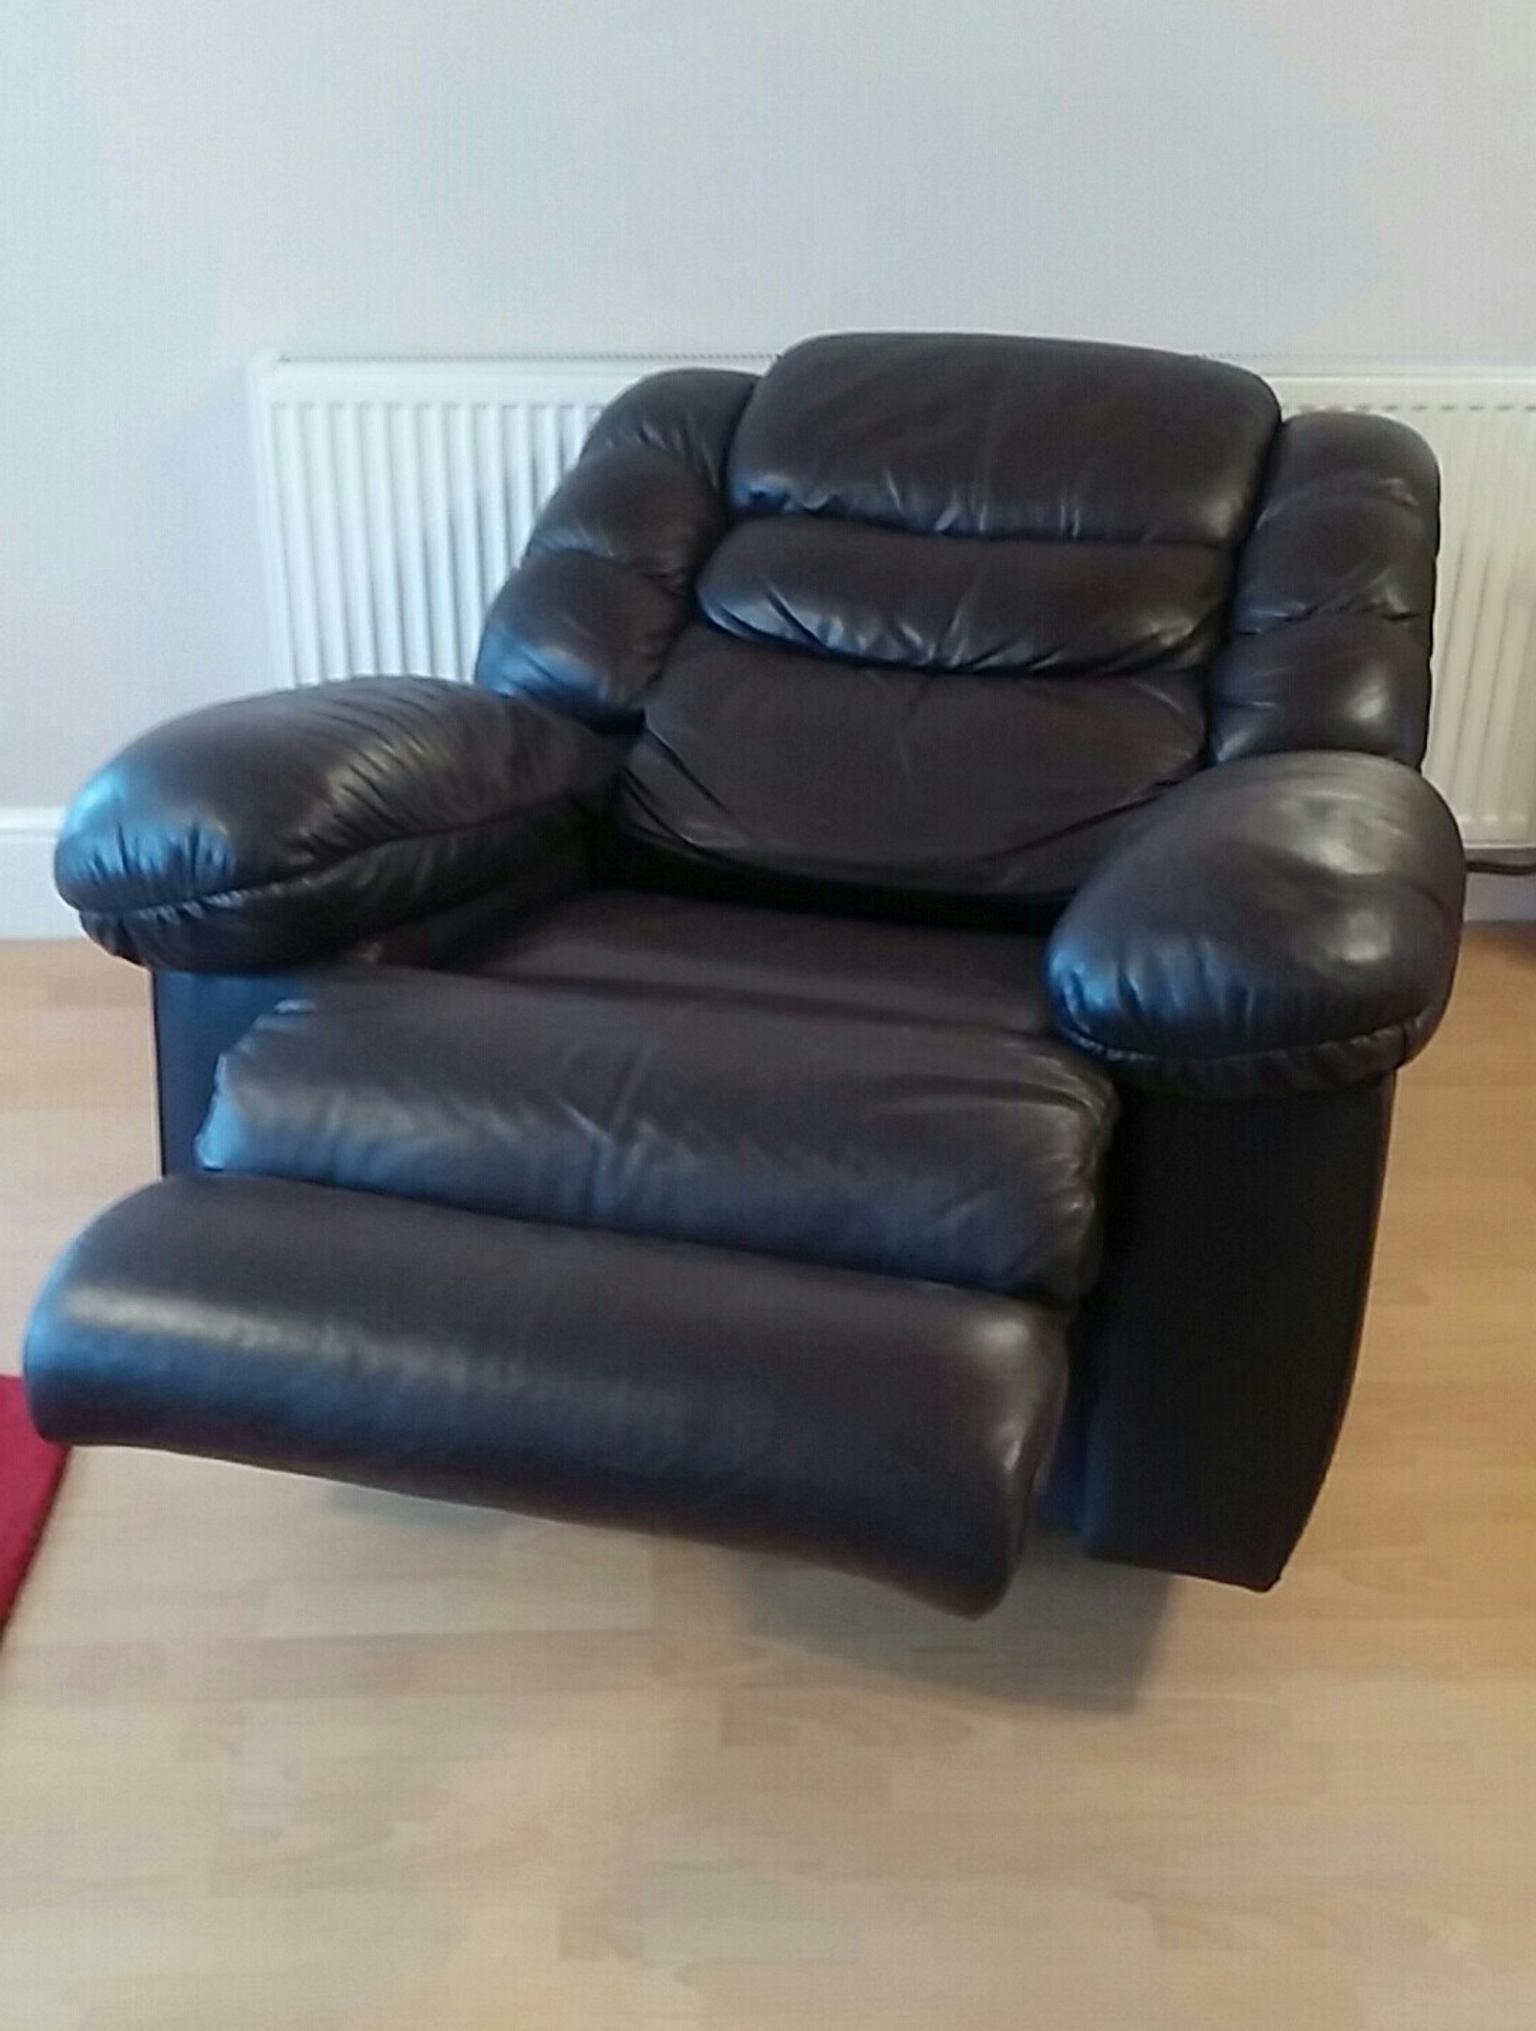 Reclining Lazy Boy Chair In Coventry For 50 00 For Sale Shpock